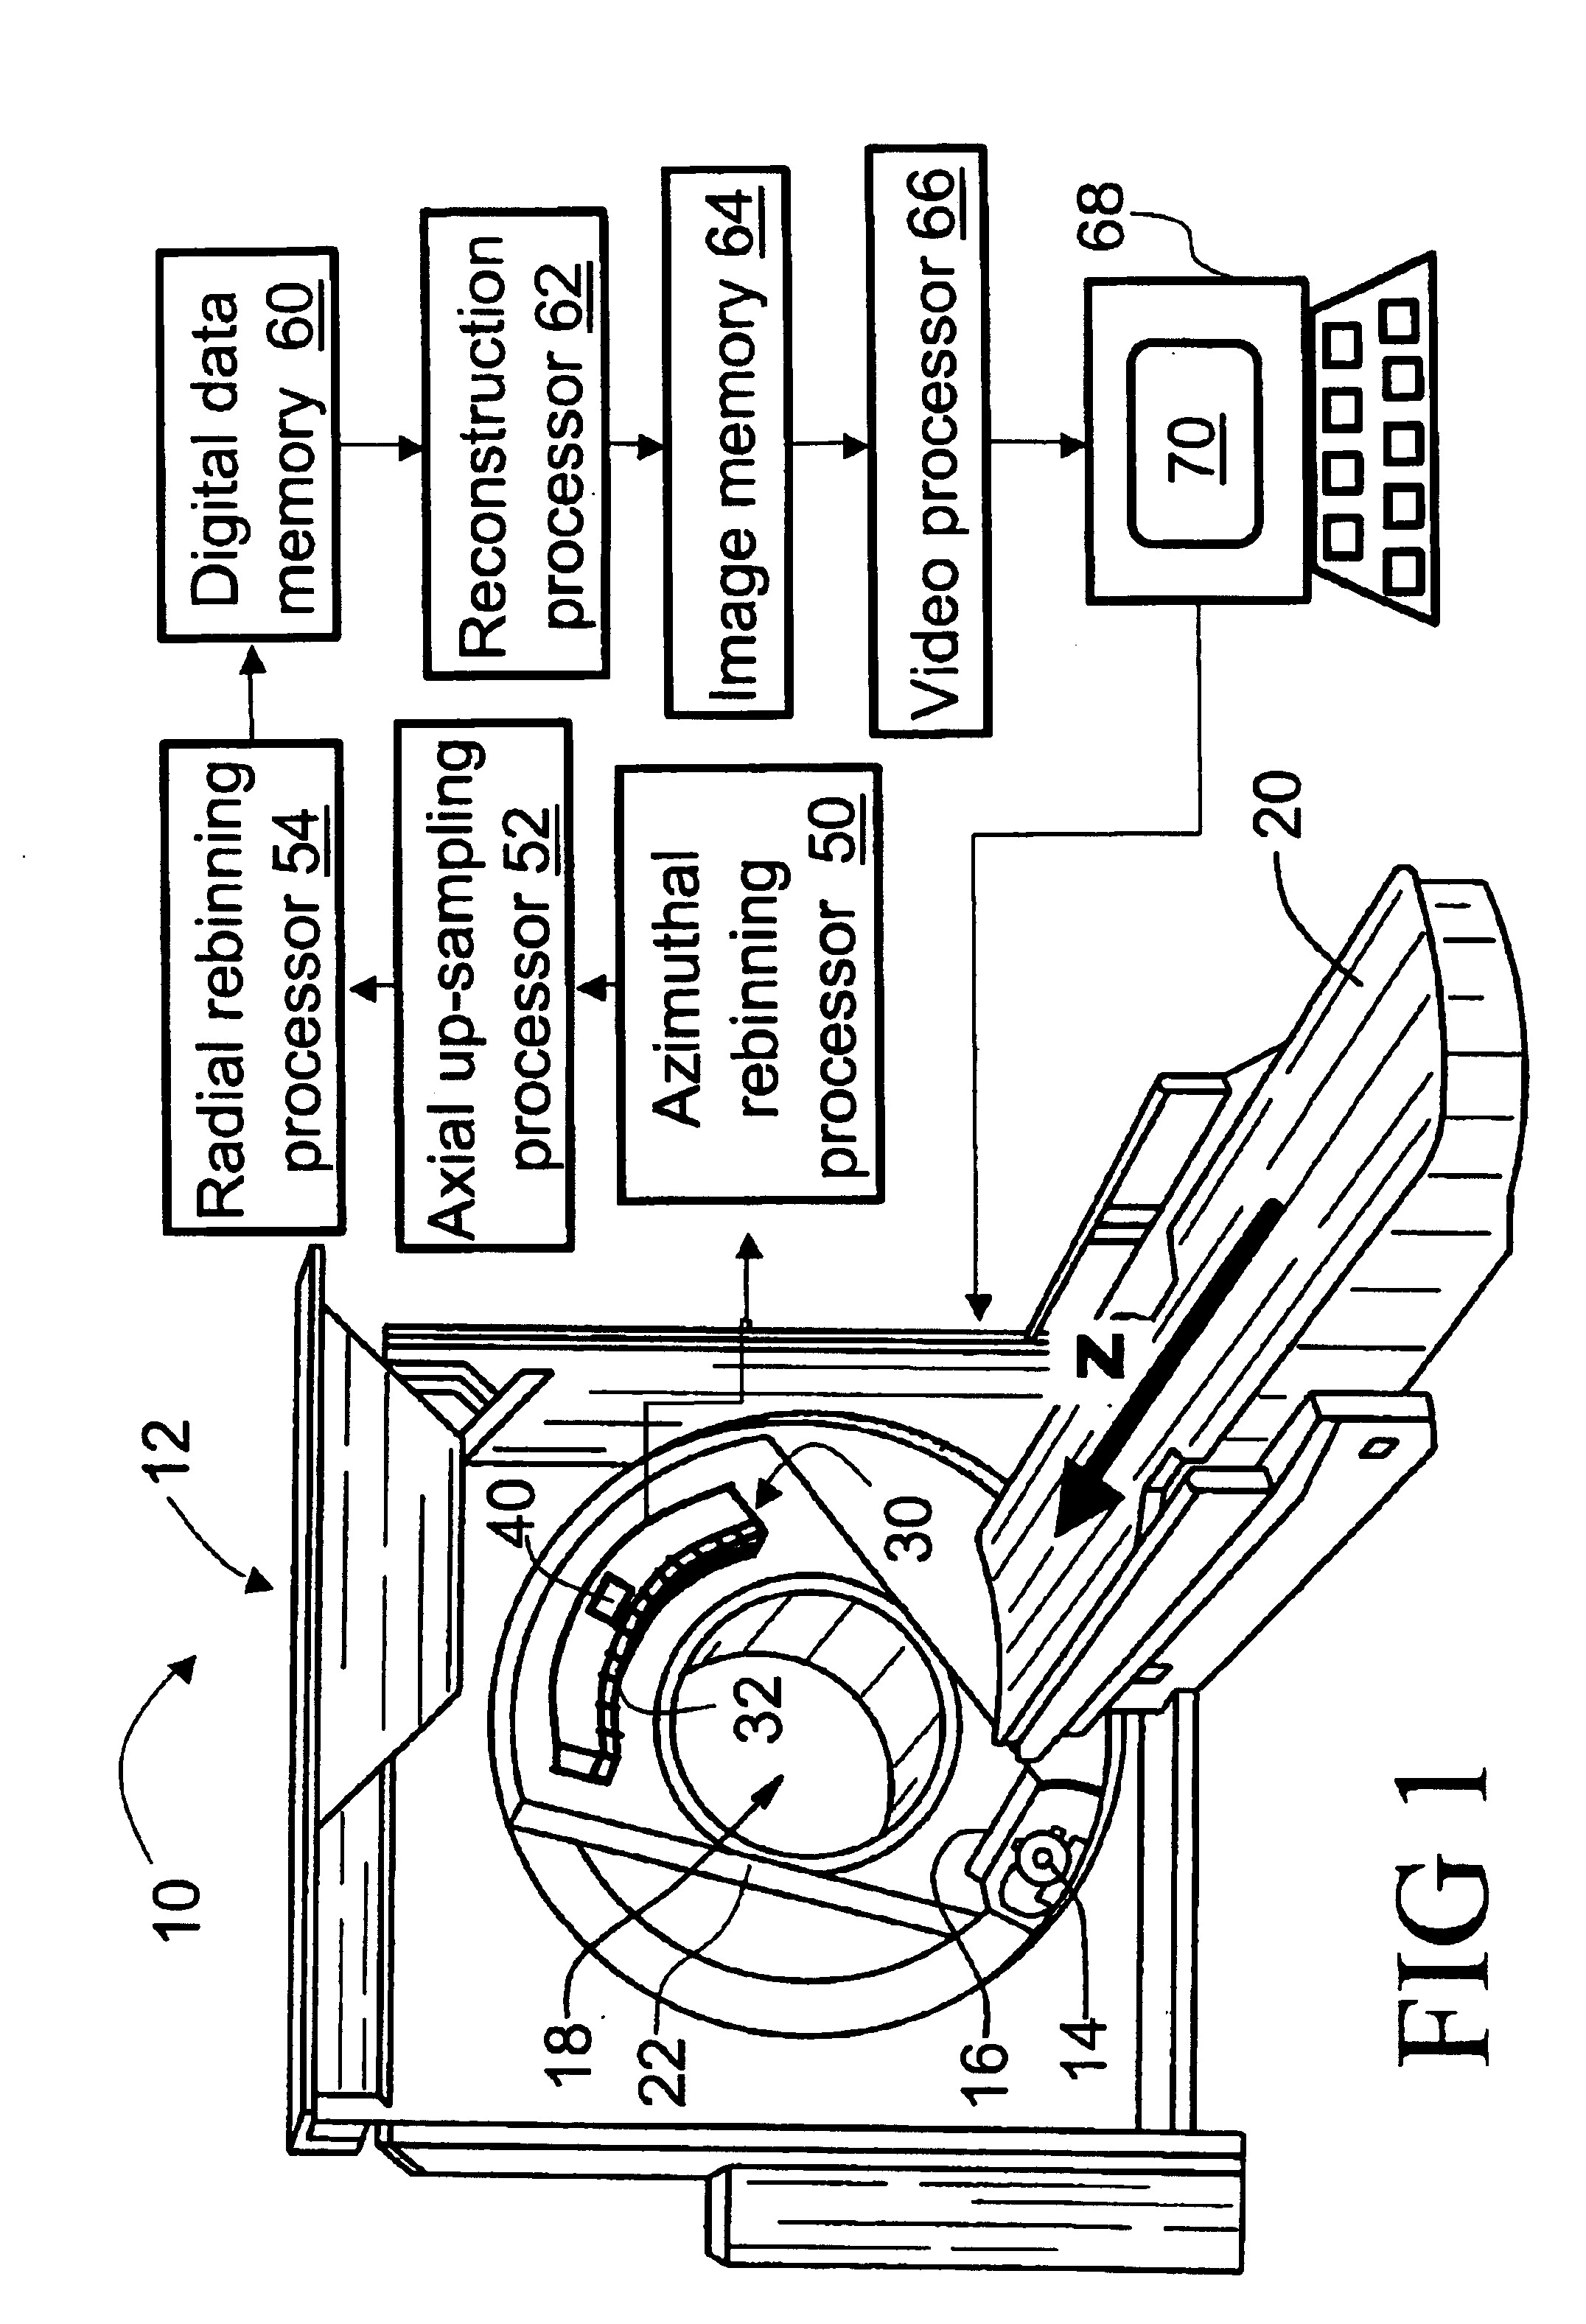 Dynamic detector interlacing for computed tomography